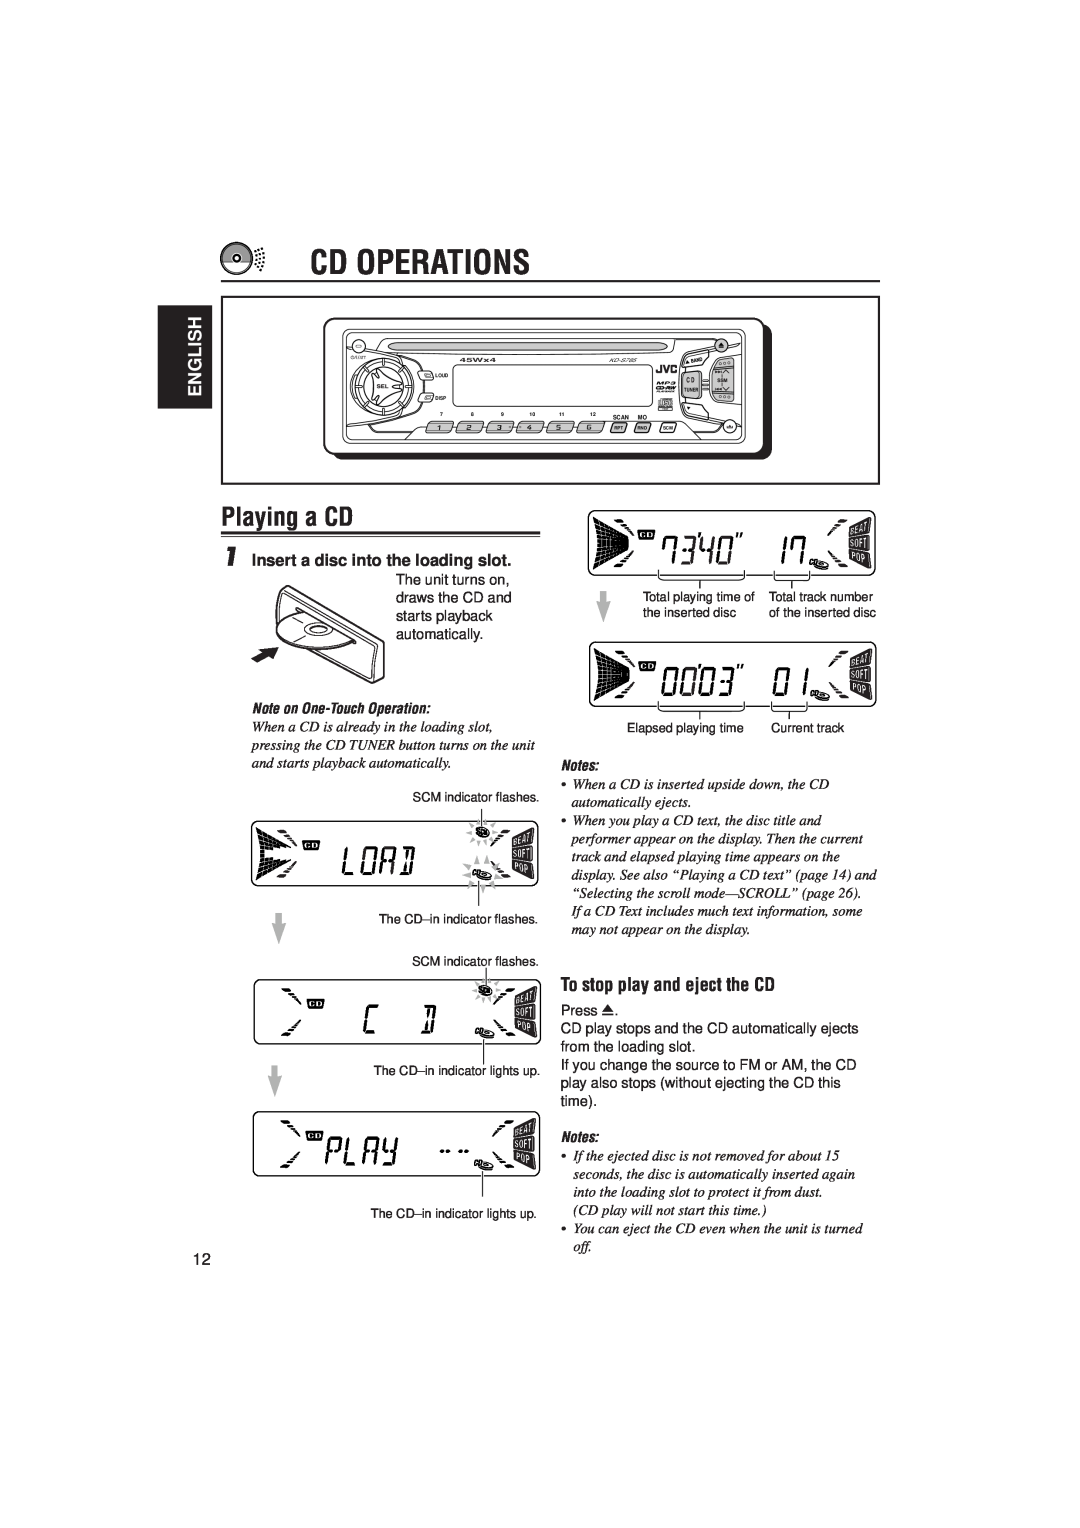 JVC KD-S785 manual Cd Operations, Playing a CD, To stop play and eject the CD, Insert a disc into the loading slot, English 